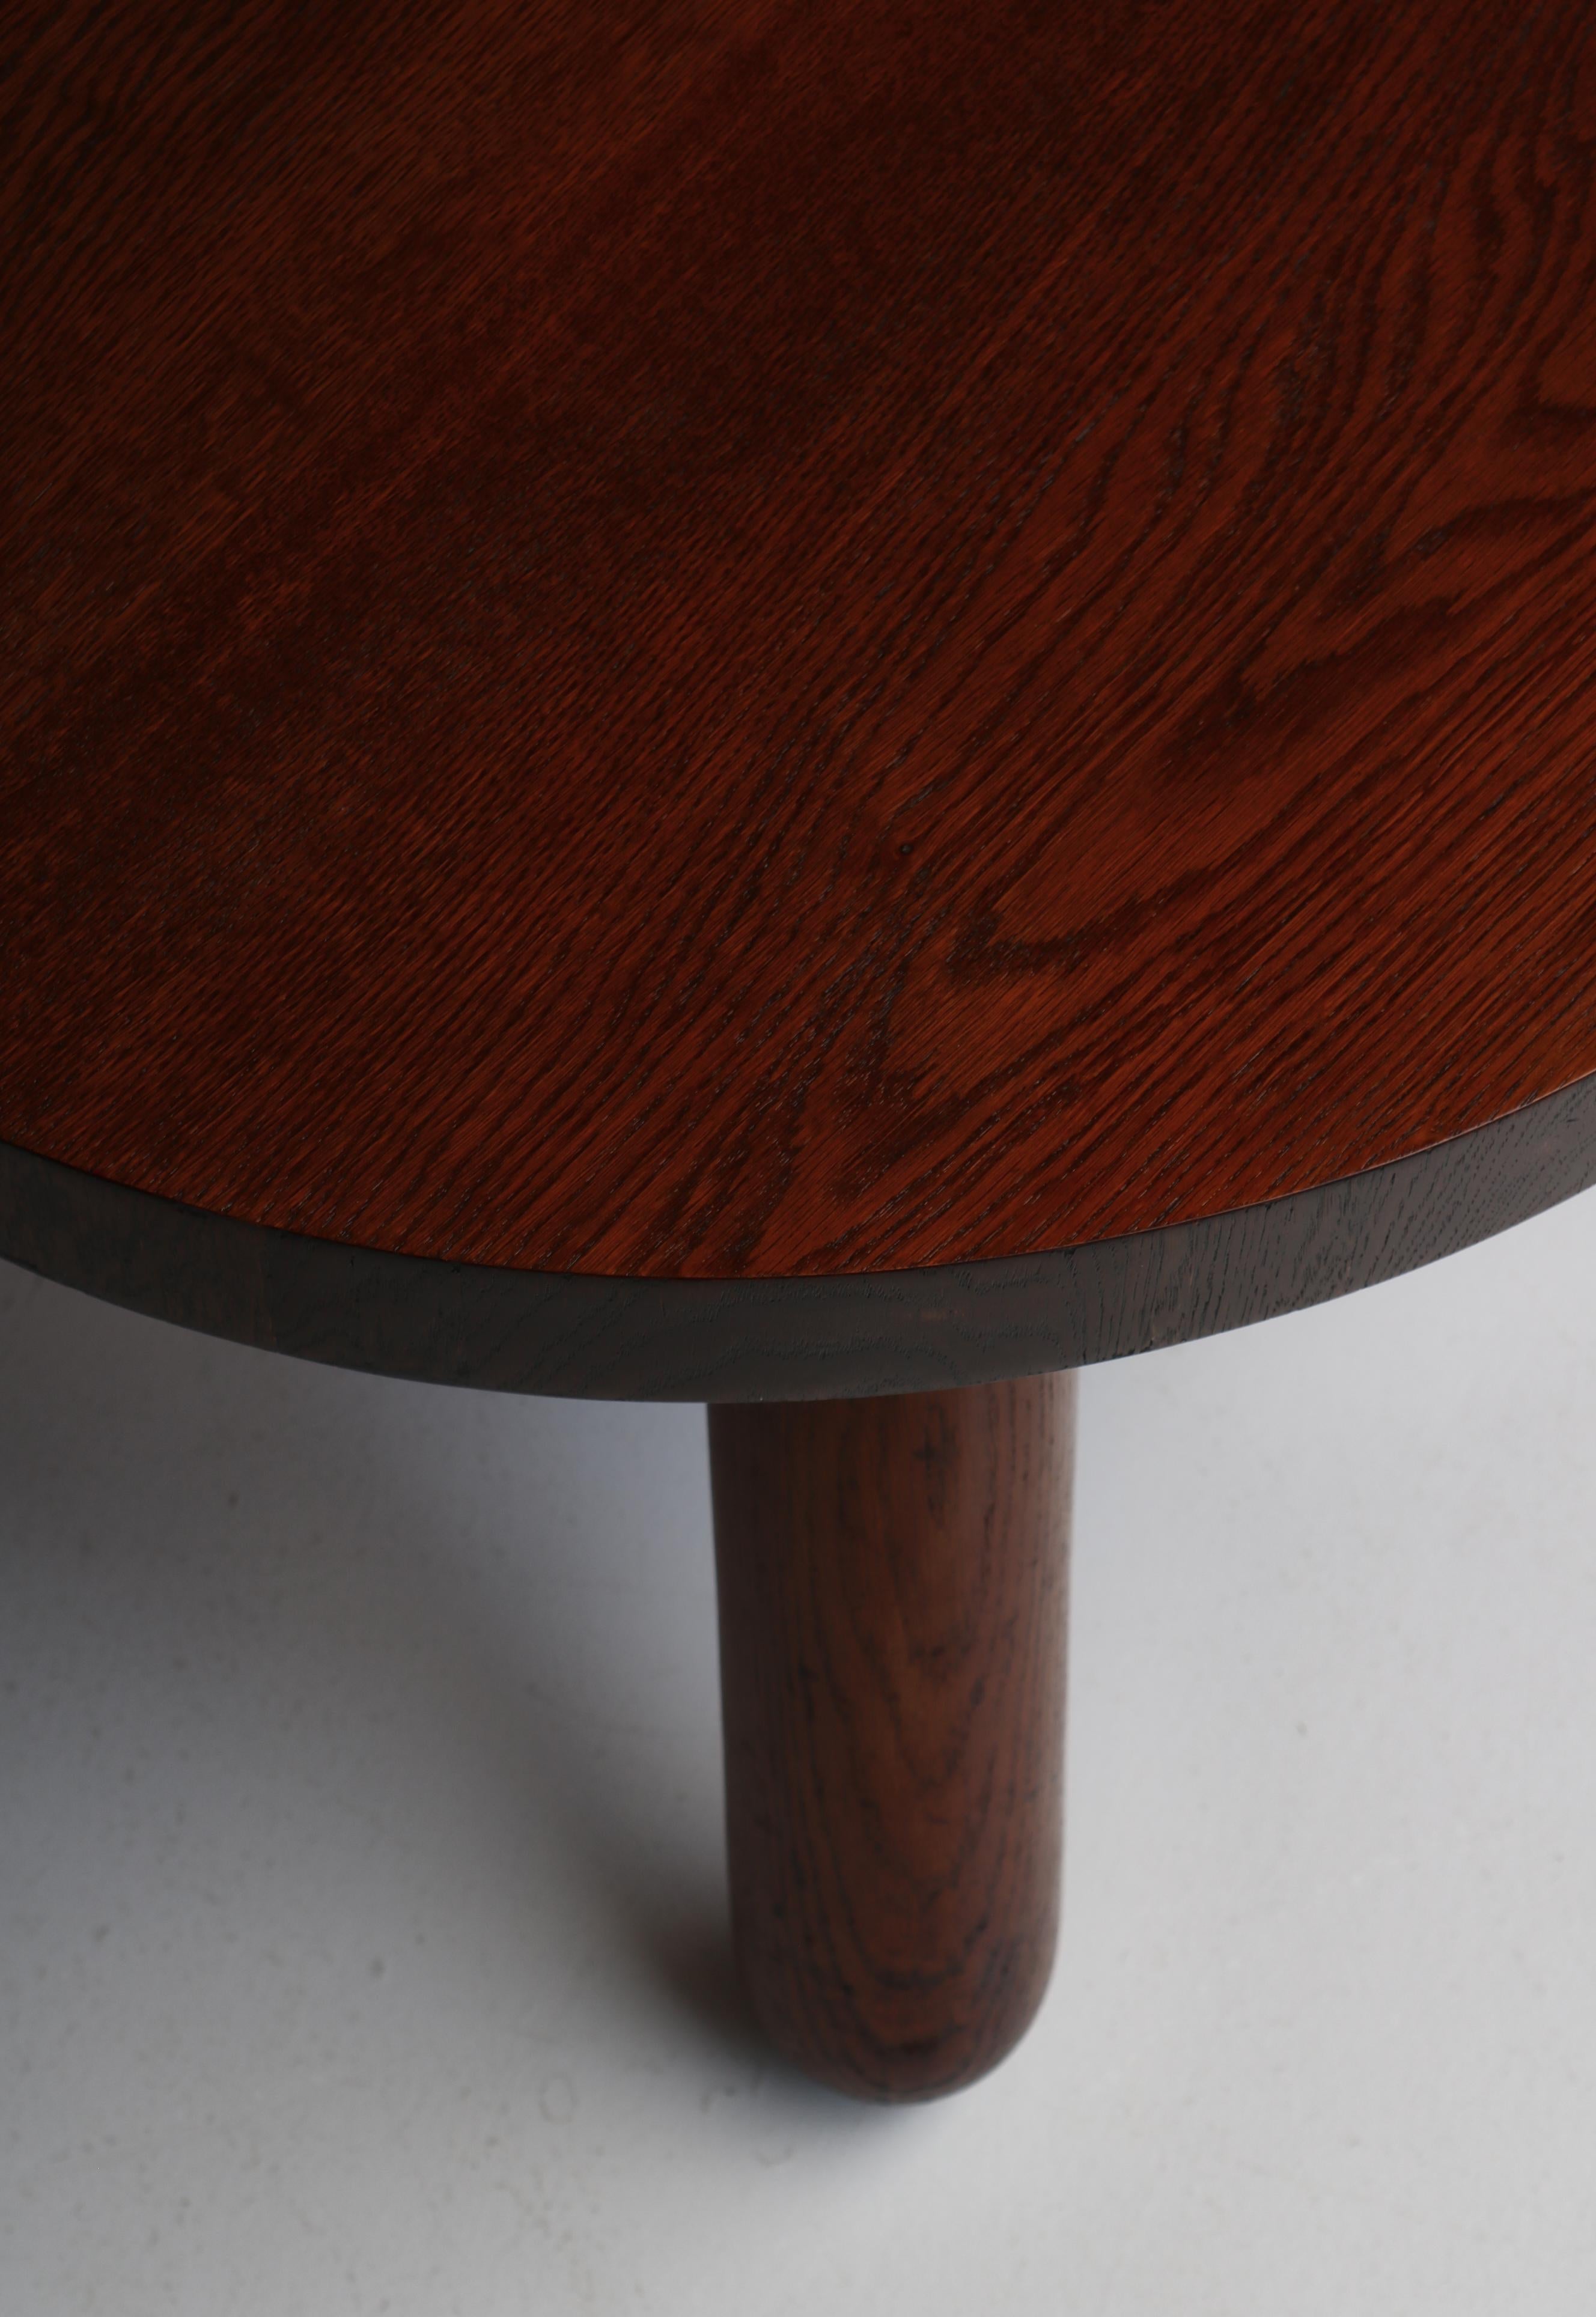 Chunky Danish Modern Side Table in Stained Oak by Otto Færge, Denmark, 1940s For Sale 3